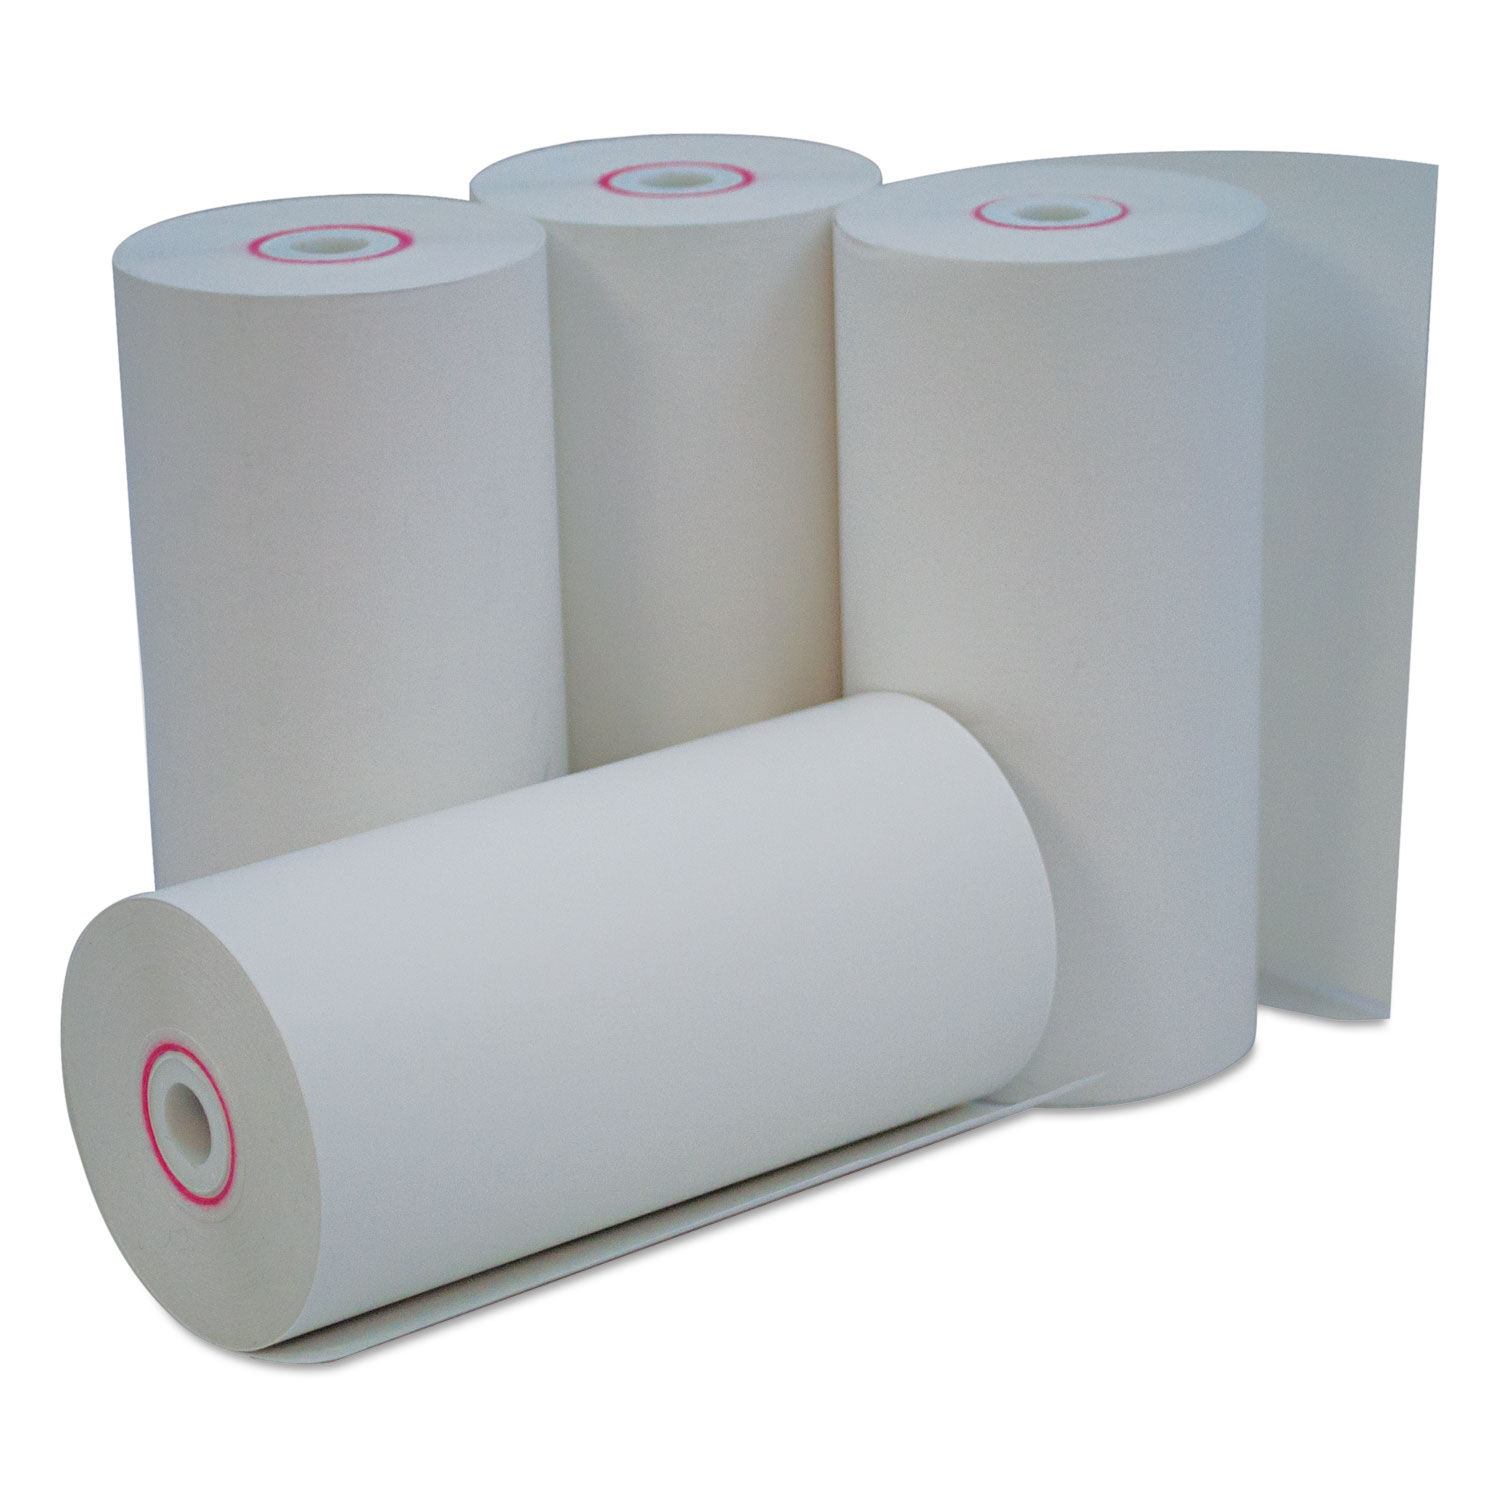 Direct Thermal Print Paper Rolls By Universal® Unv35765 5973